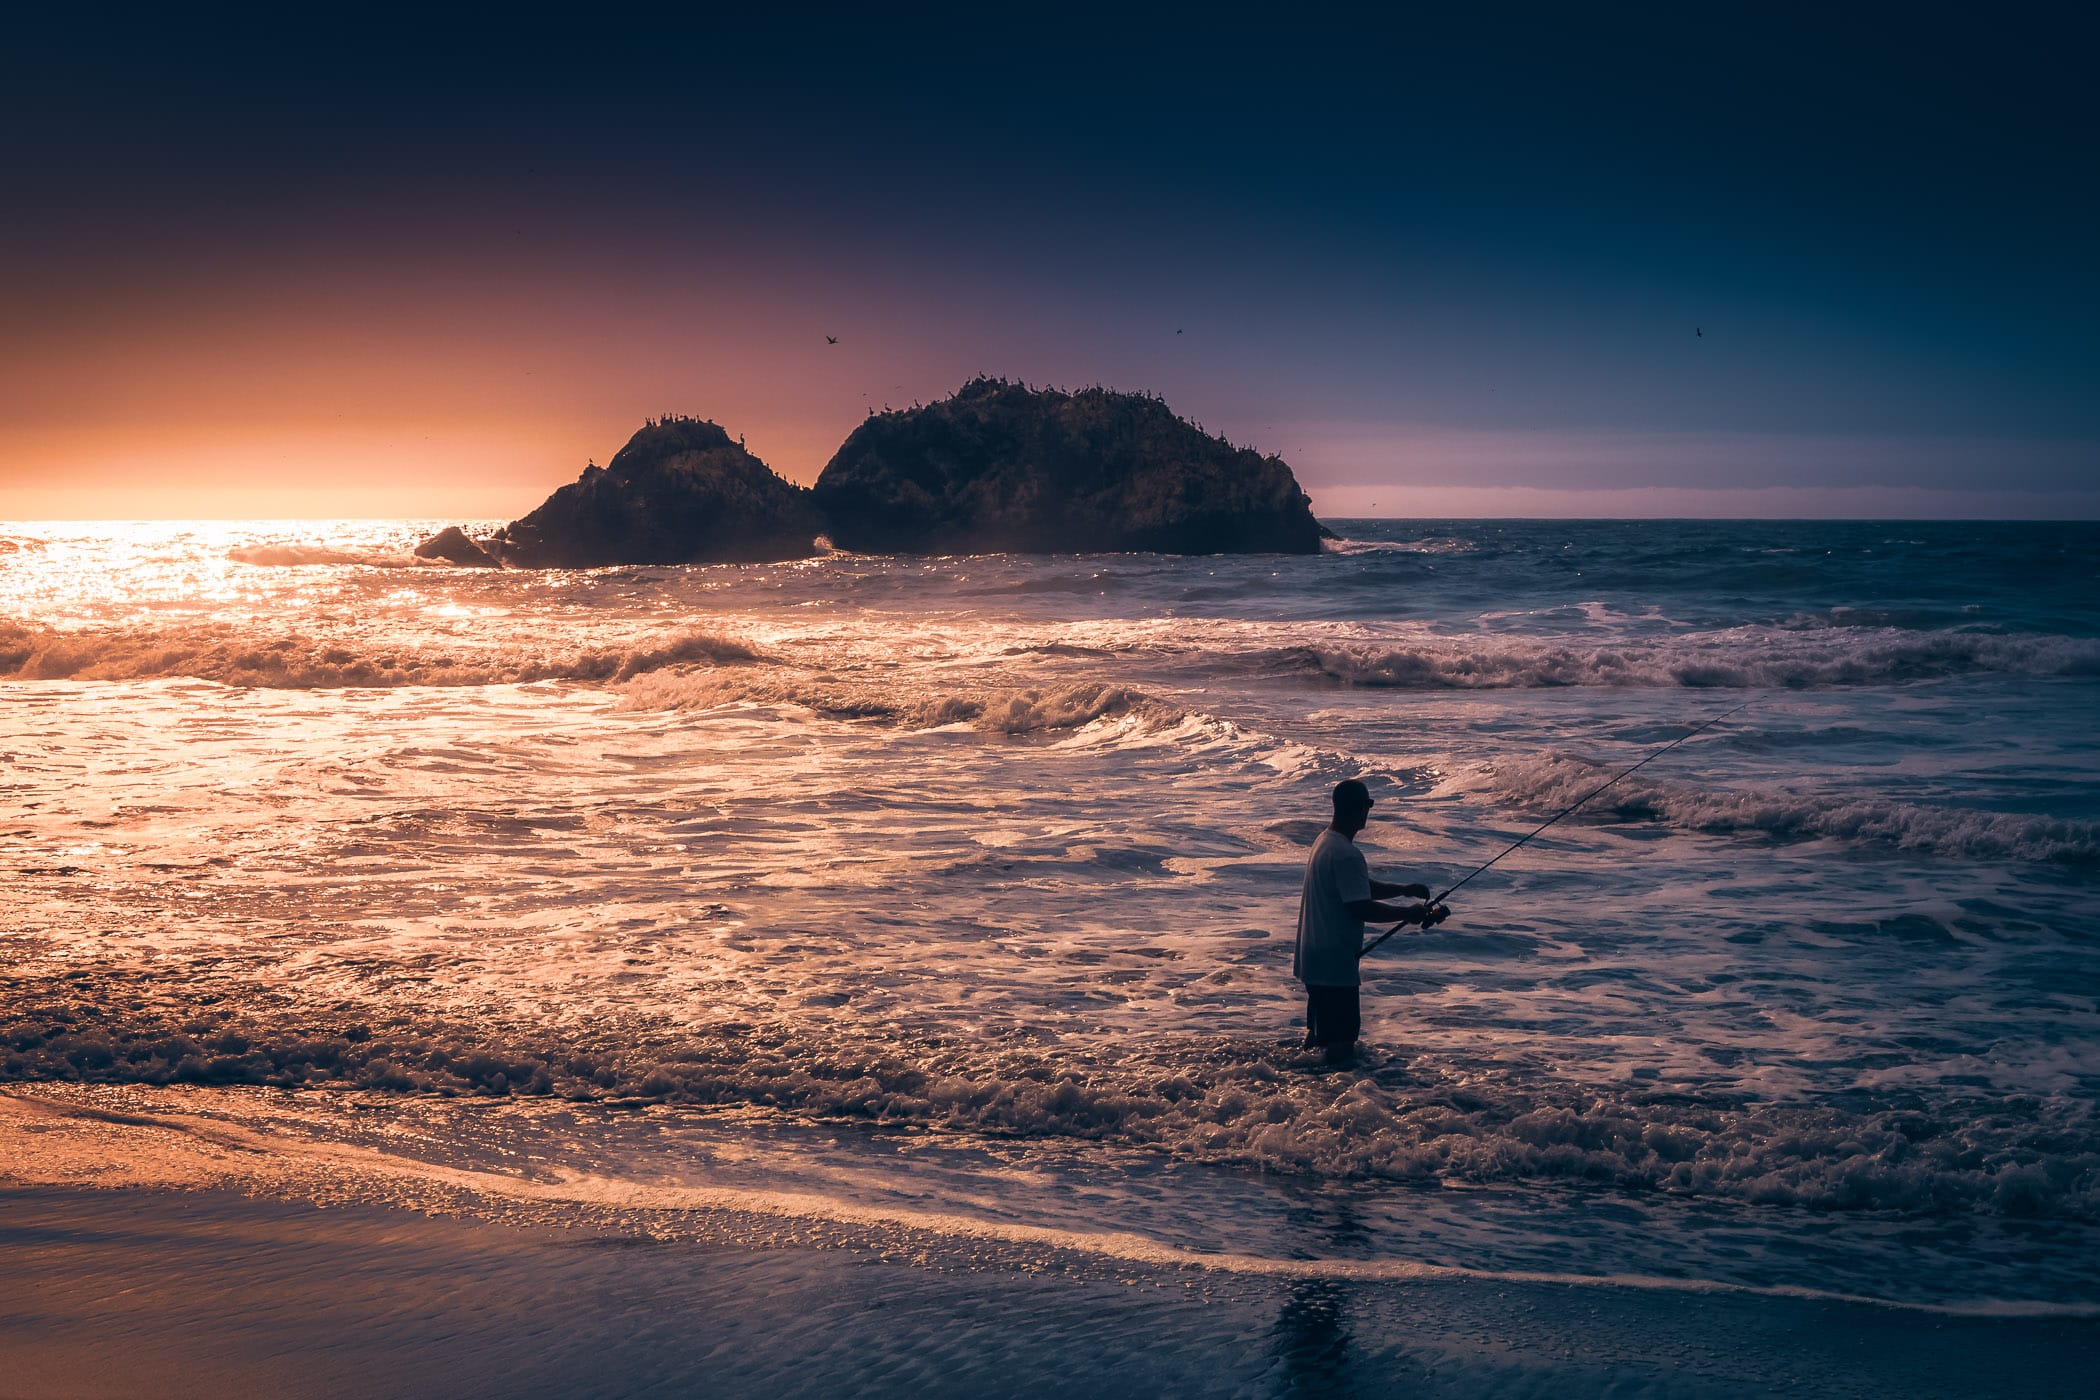 A fisherman tries his luck as the sun sets on the Pacific Ocean at San Francisco's Lands End.